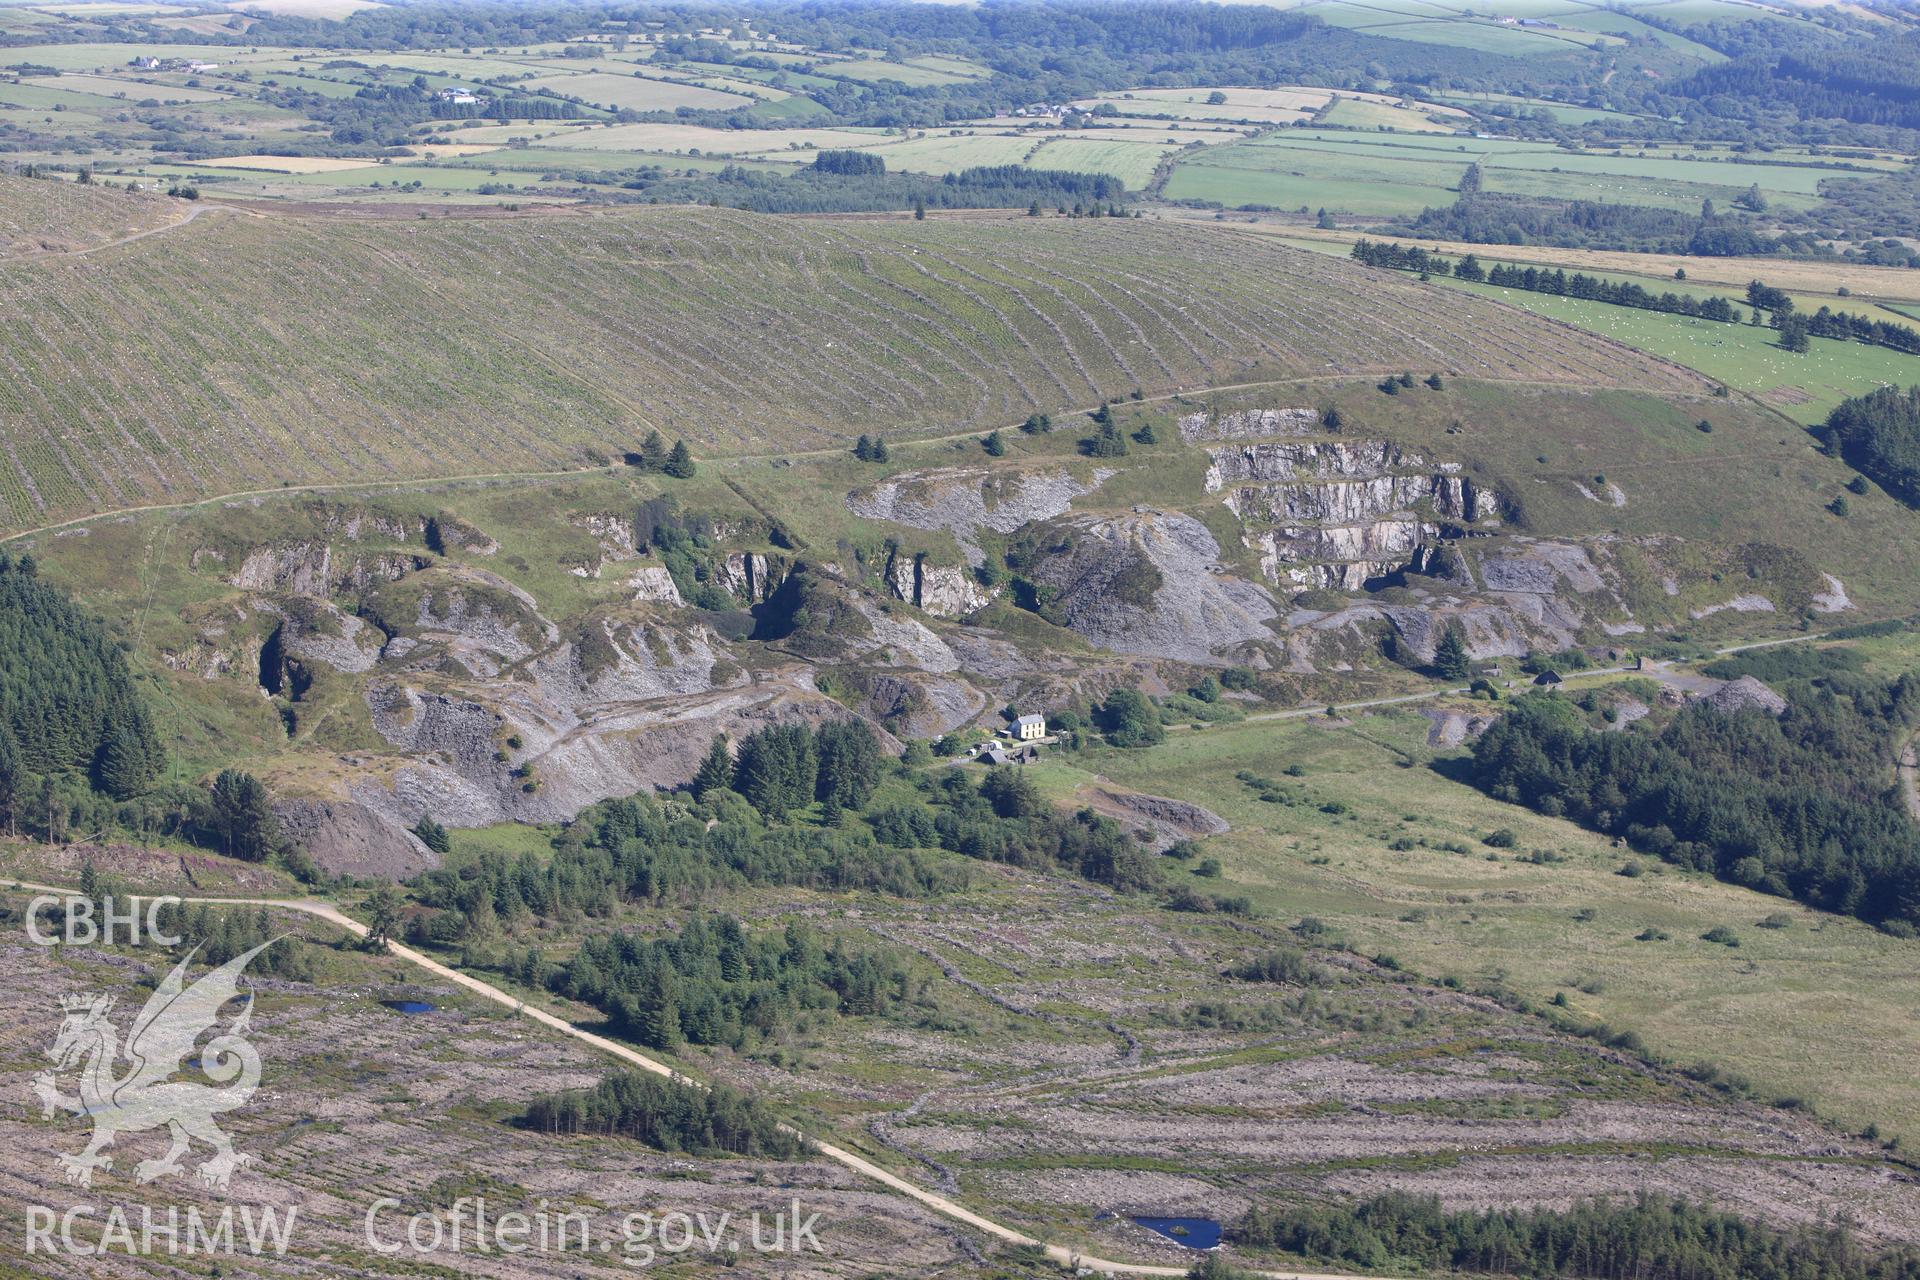 RCAHMW colour oblique photograph of Rosebush quarry. Taken by Toby Driver and Oliver Davies on 28/06/2011.